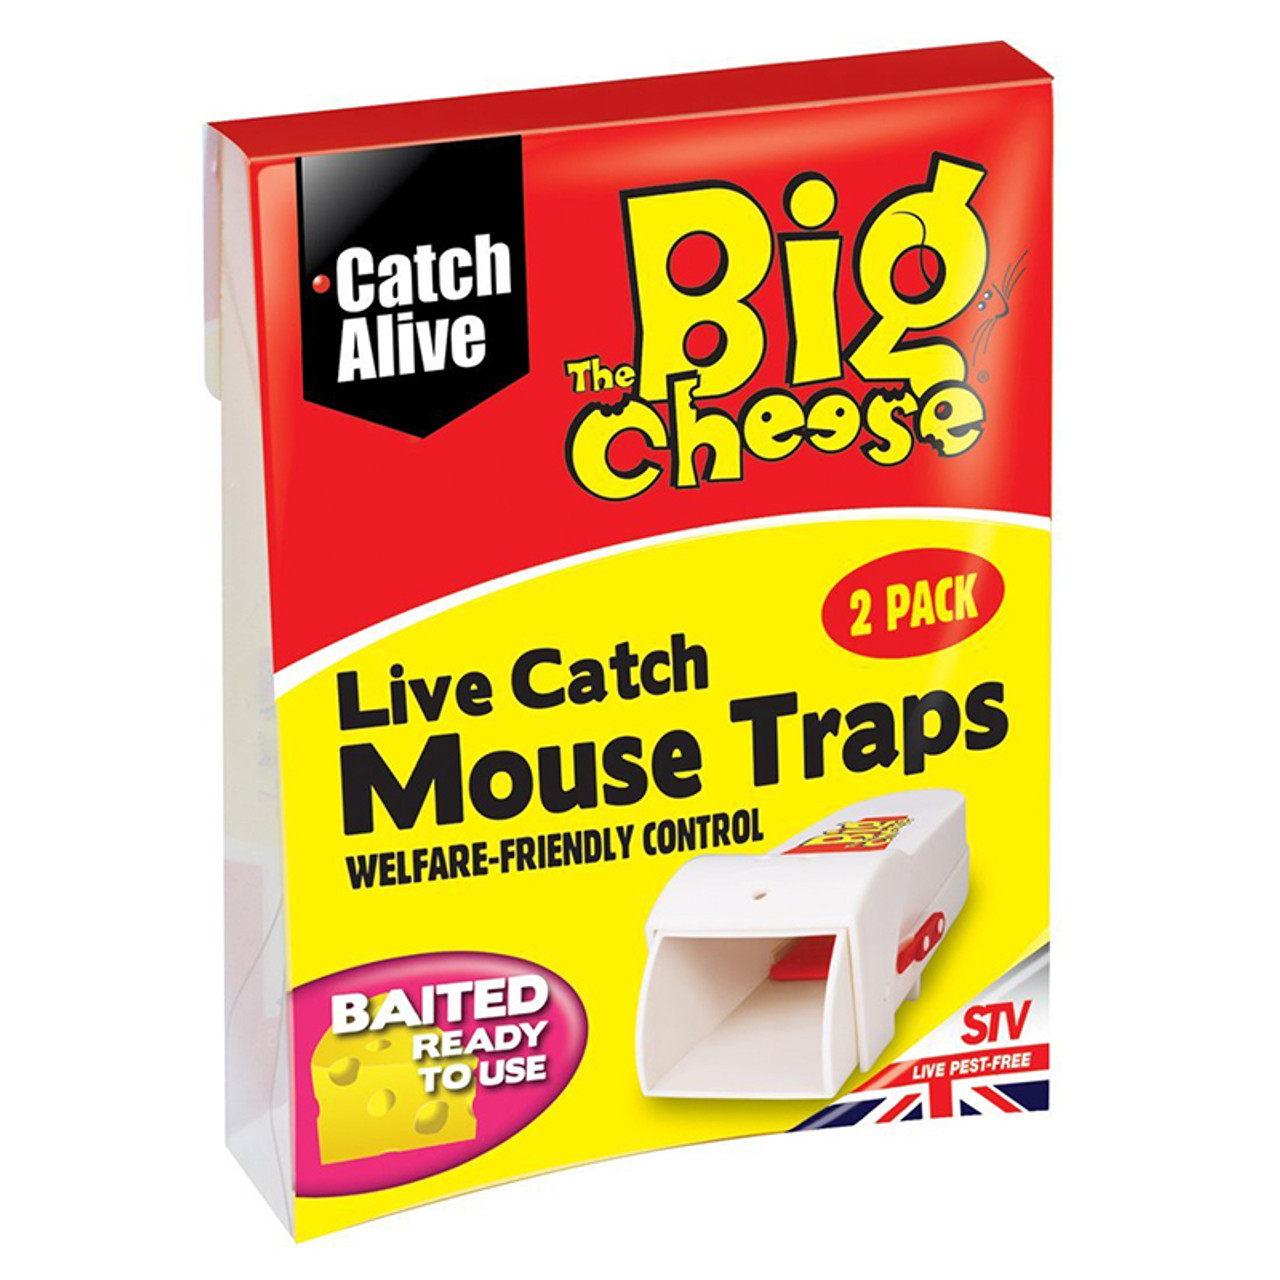 https://cdn11.bigcommerce.com/s-lmuttm1jiv/images/stencil/1280x1280/products/253/982/The-Big-Cheese-Live-Catch-Mouse-Trap-2-Pack-STV155__61293.1556982870.jpg?c=2